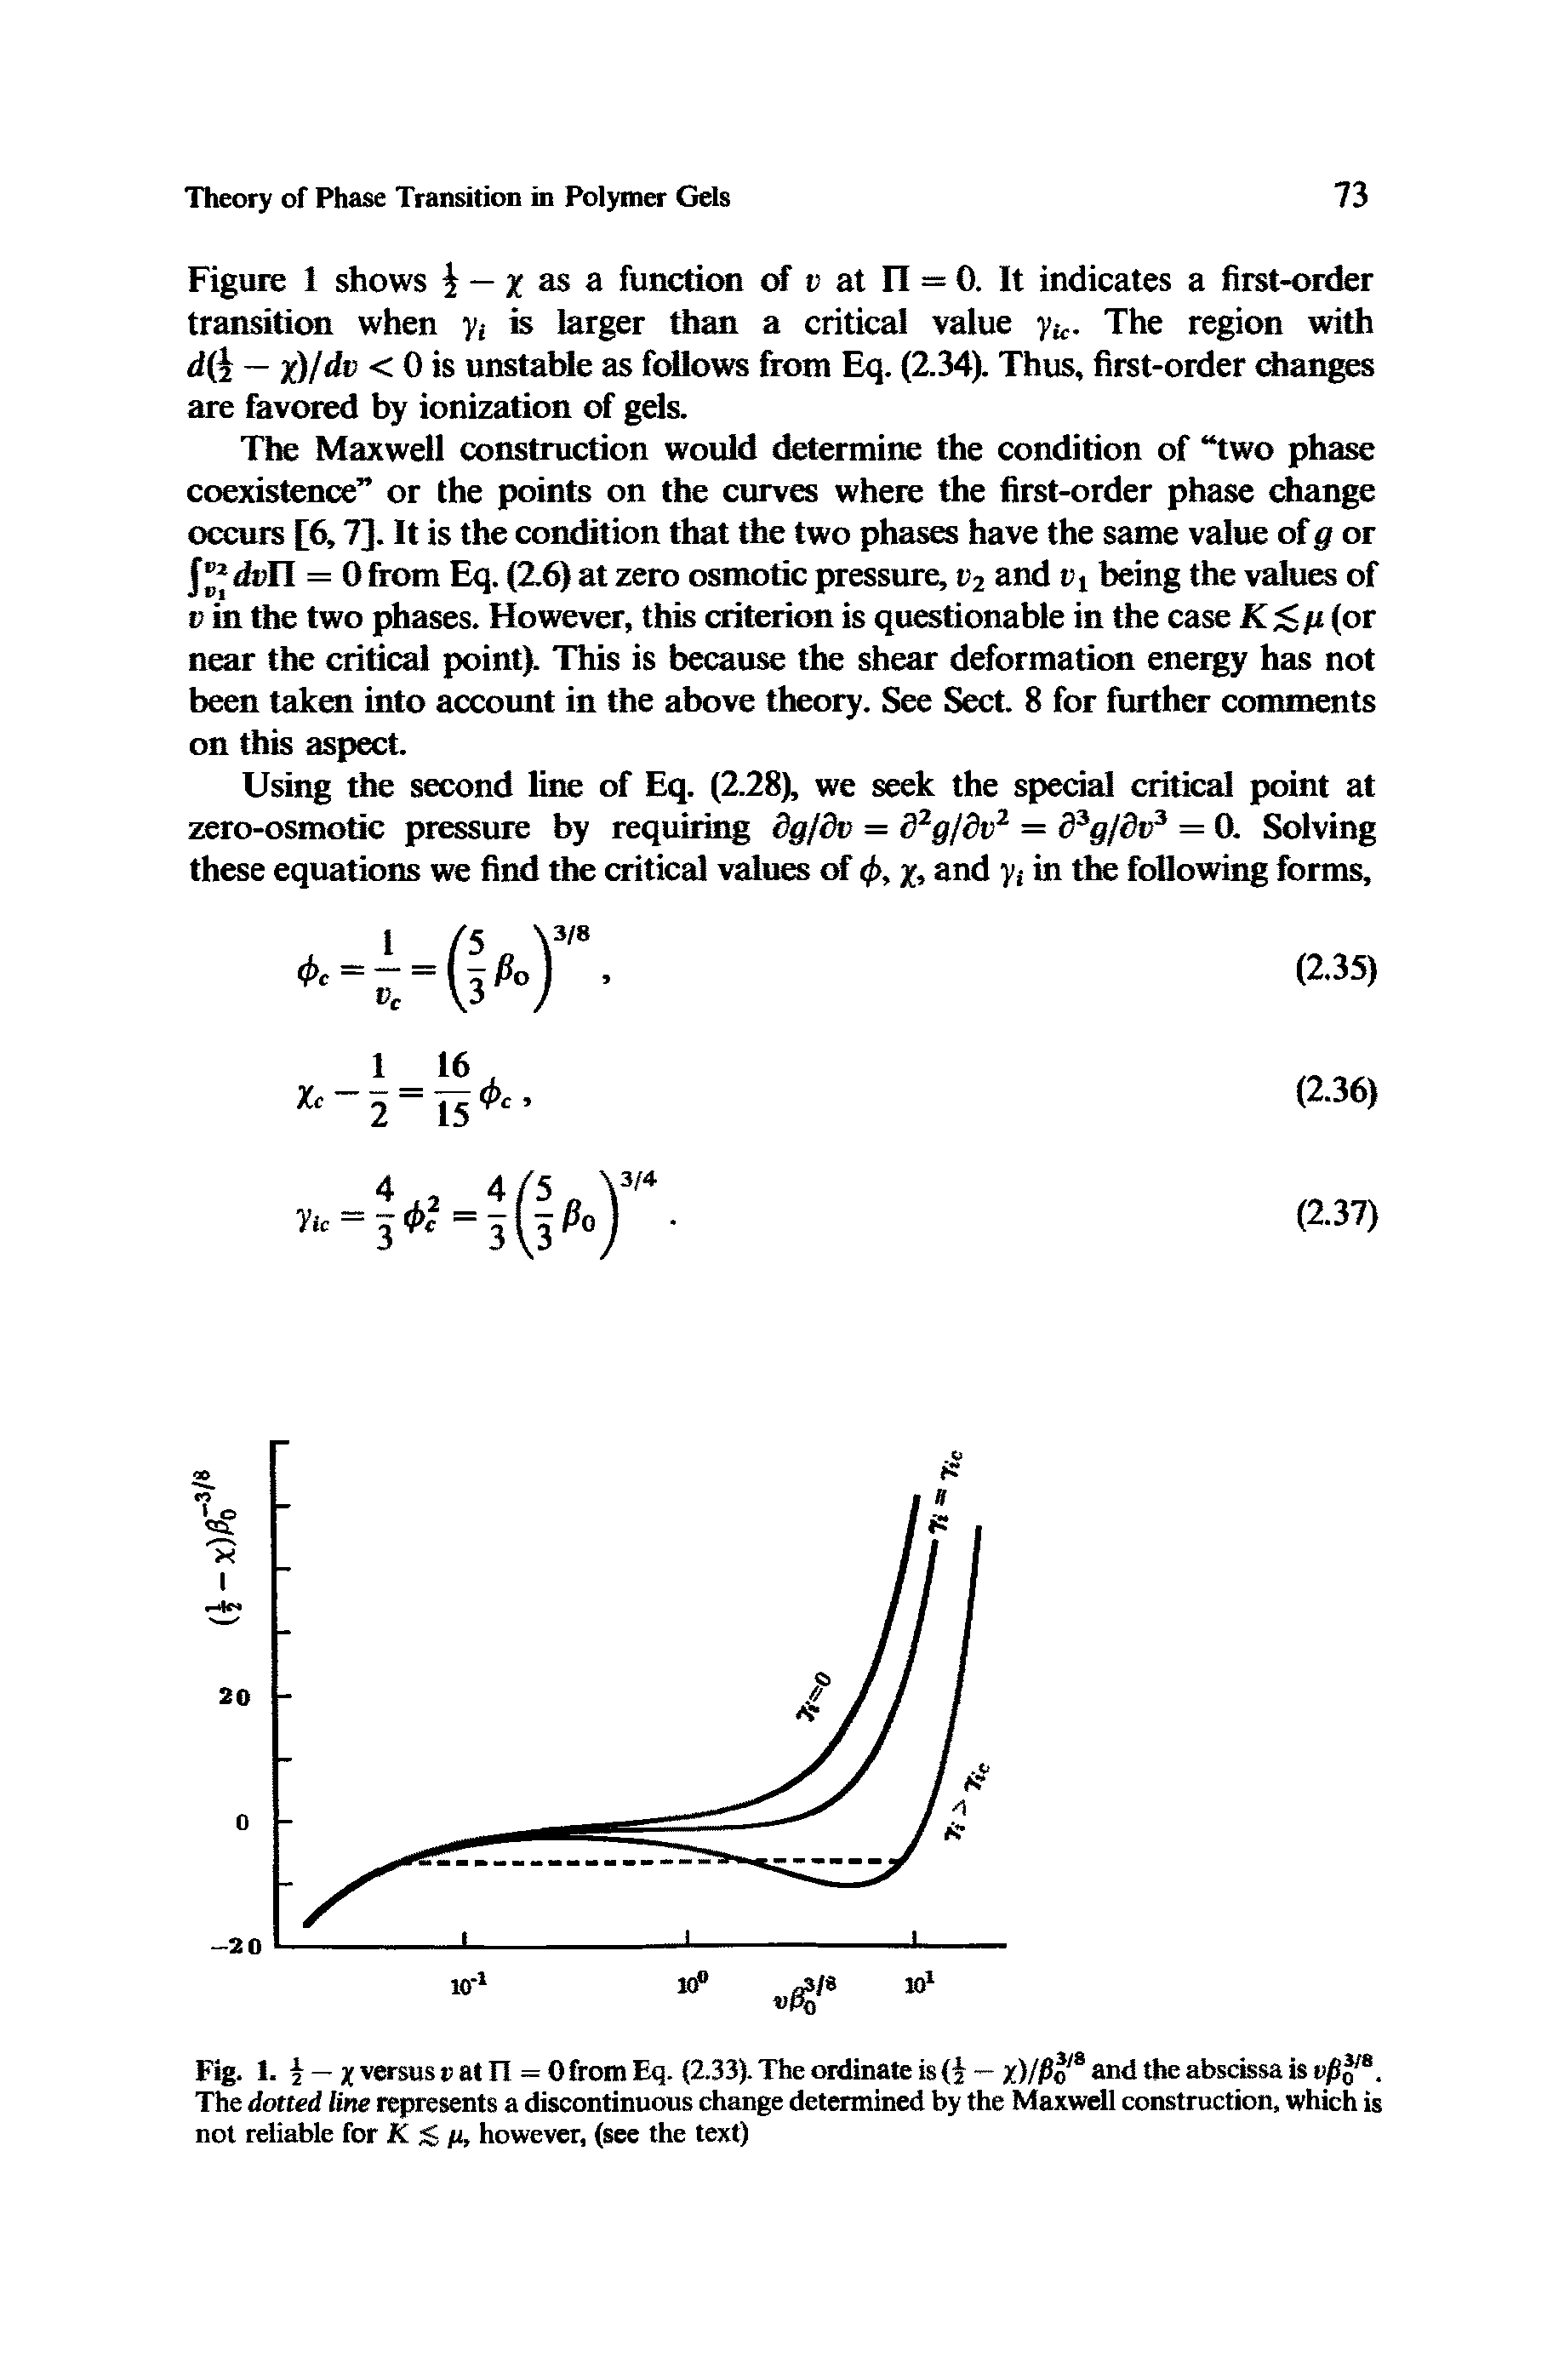 Fig. 1. 2 X versus v at II = 0 from Eq. (2.33). The ordinate is (i — xMPc and the abscissa is vpys. The dotted line represents a discontinuous change determined by the Maxwell construction, which is not reliable for K % n, however, (see the text)...